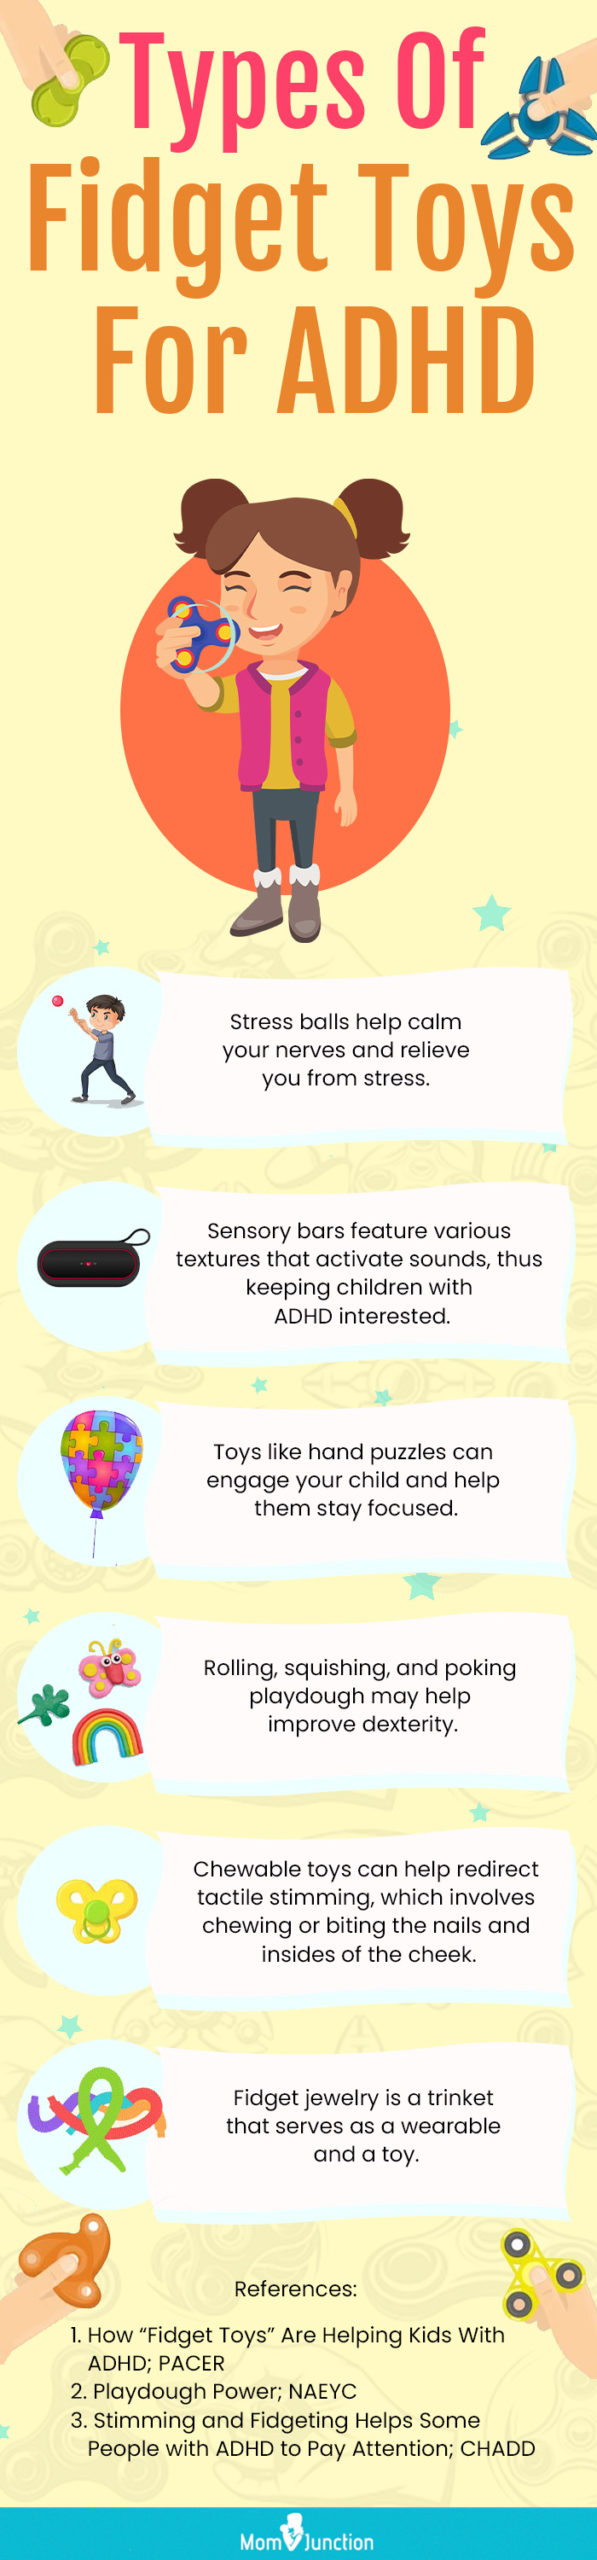 Types Of Fidget Toys For ADHD (infographic)